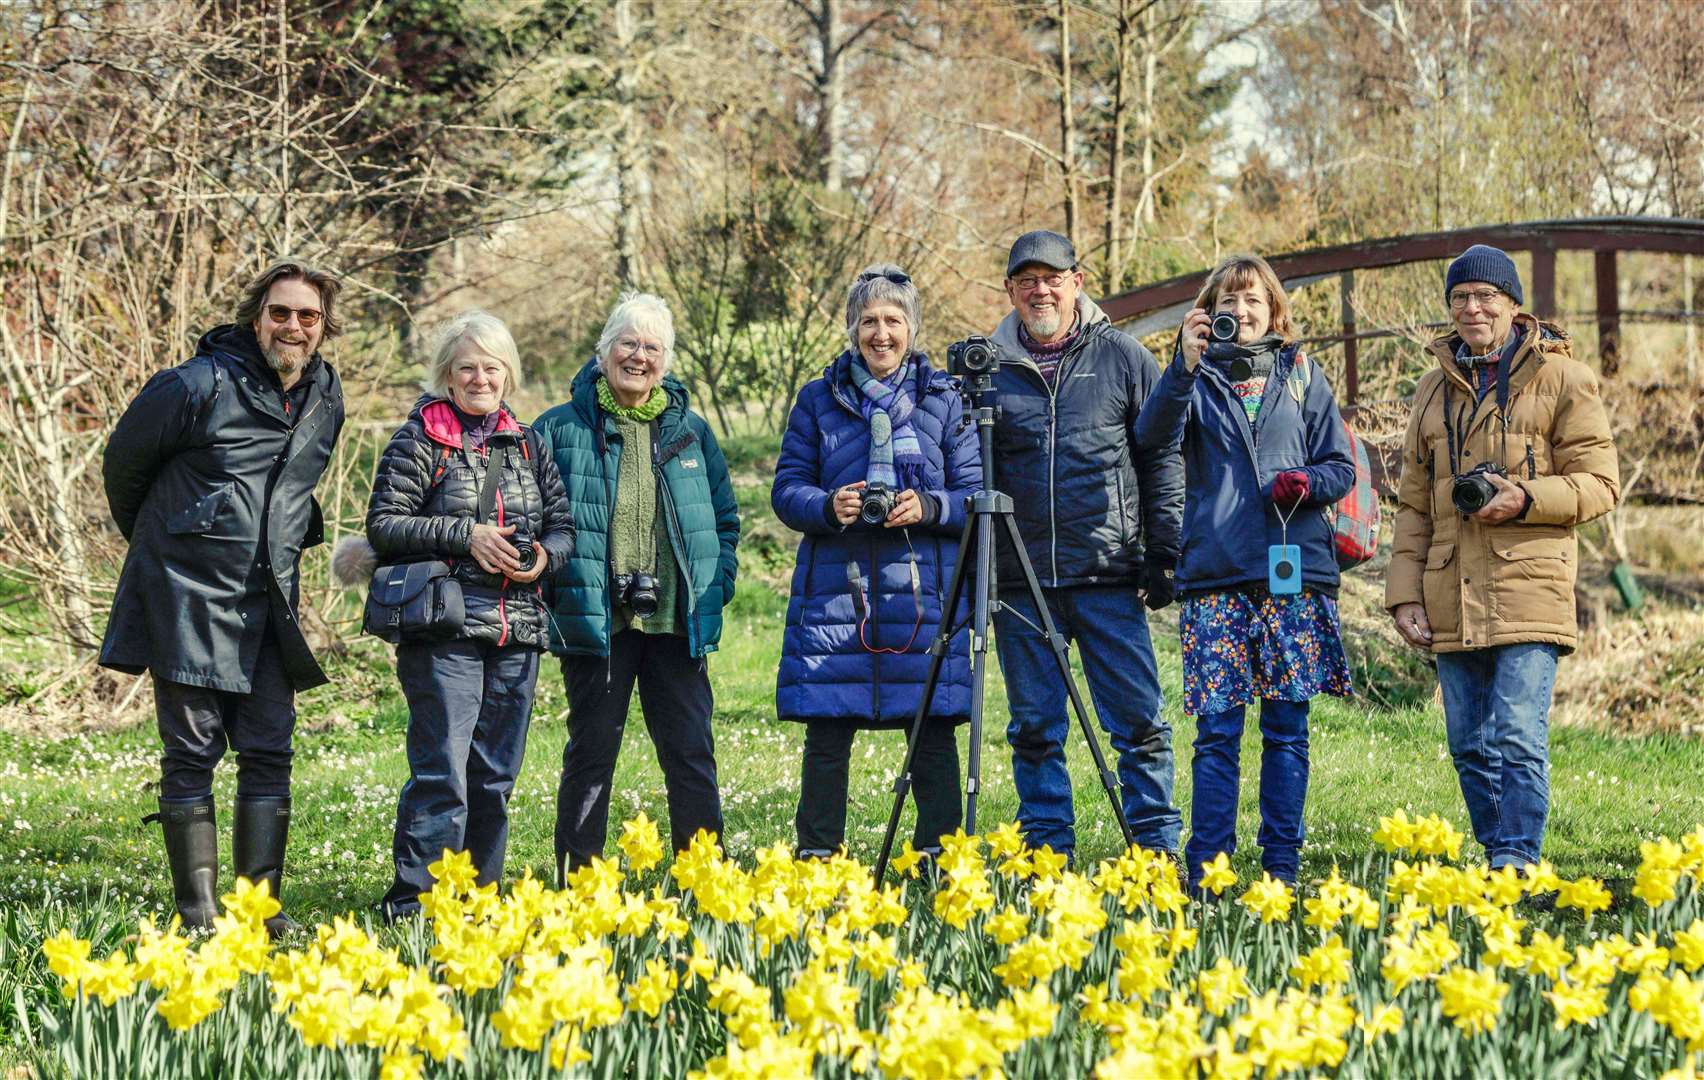 The group at Burgie Arboretum. From left: Nick Gibbons, Agnes Gardiner, Jana Hutt, Ruth Whitfield, Howard Davenport, Nichola Jones and Tony Pinner...Picture: Nick Gibbons.